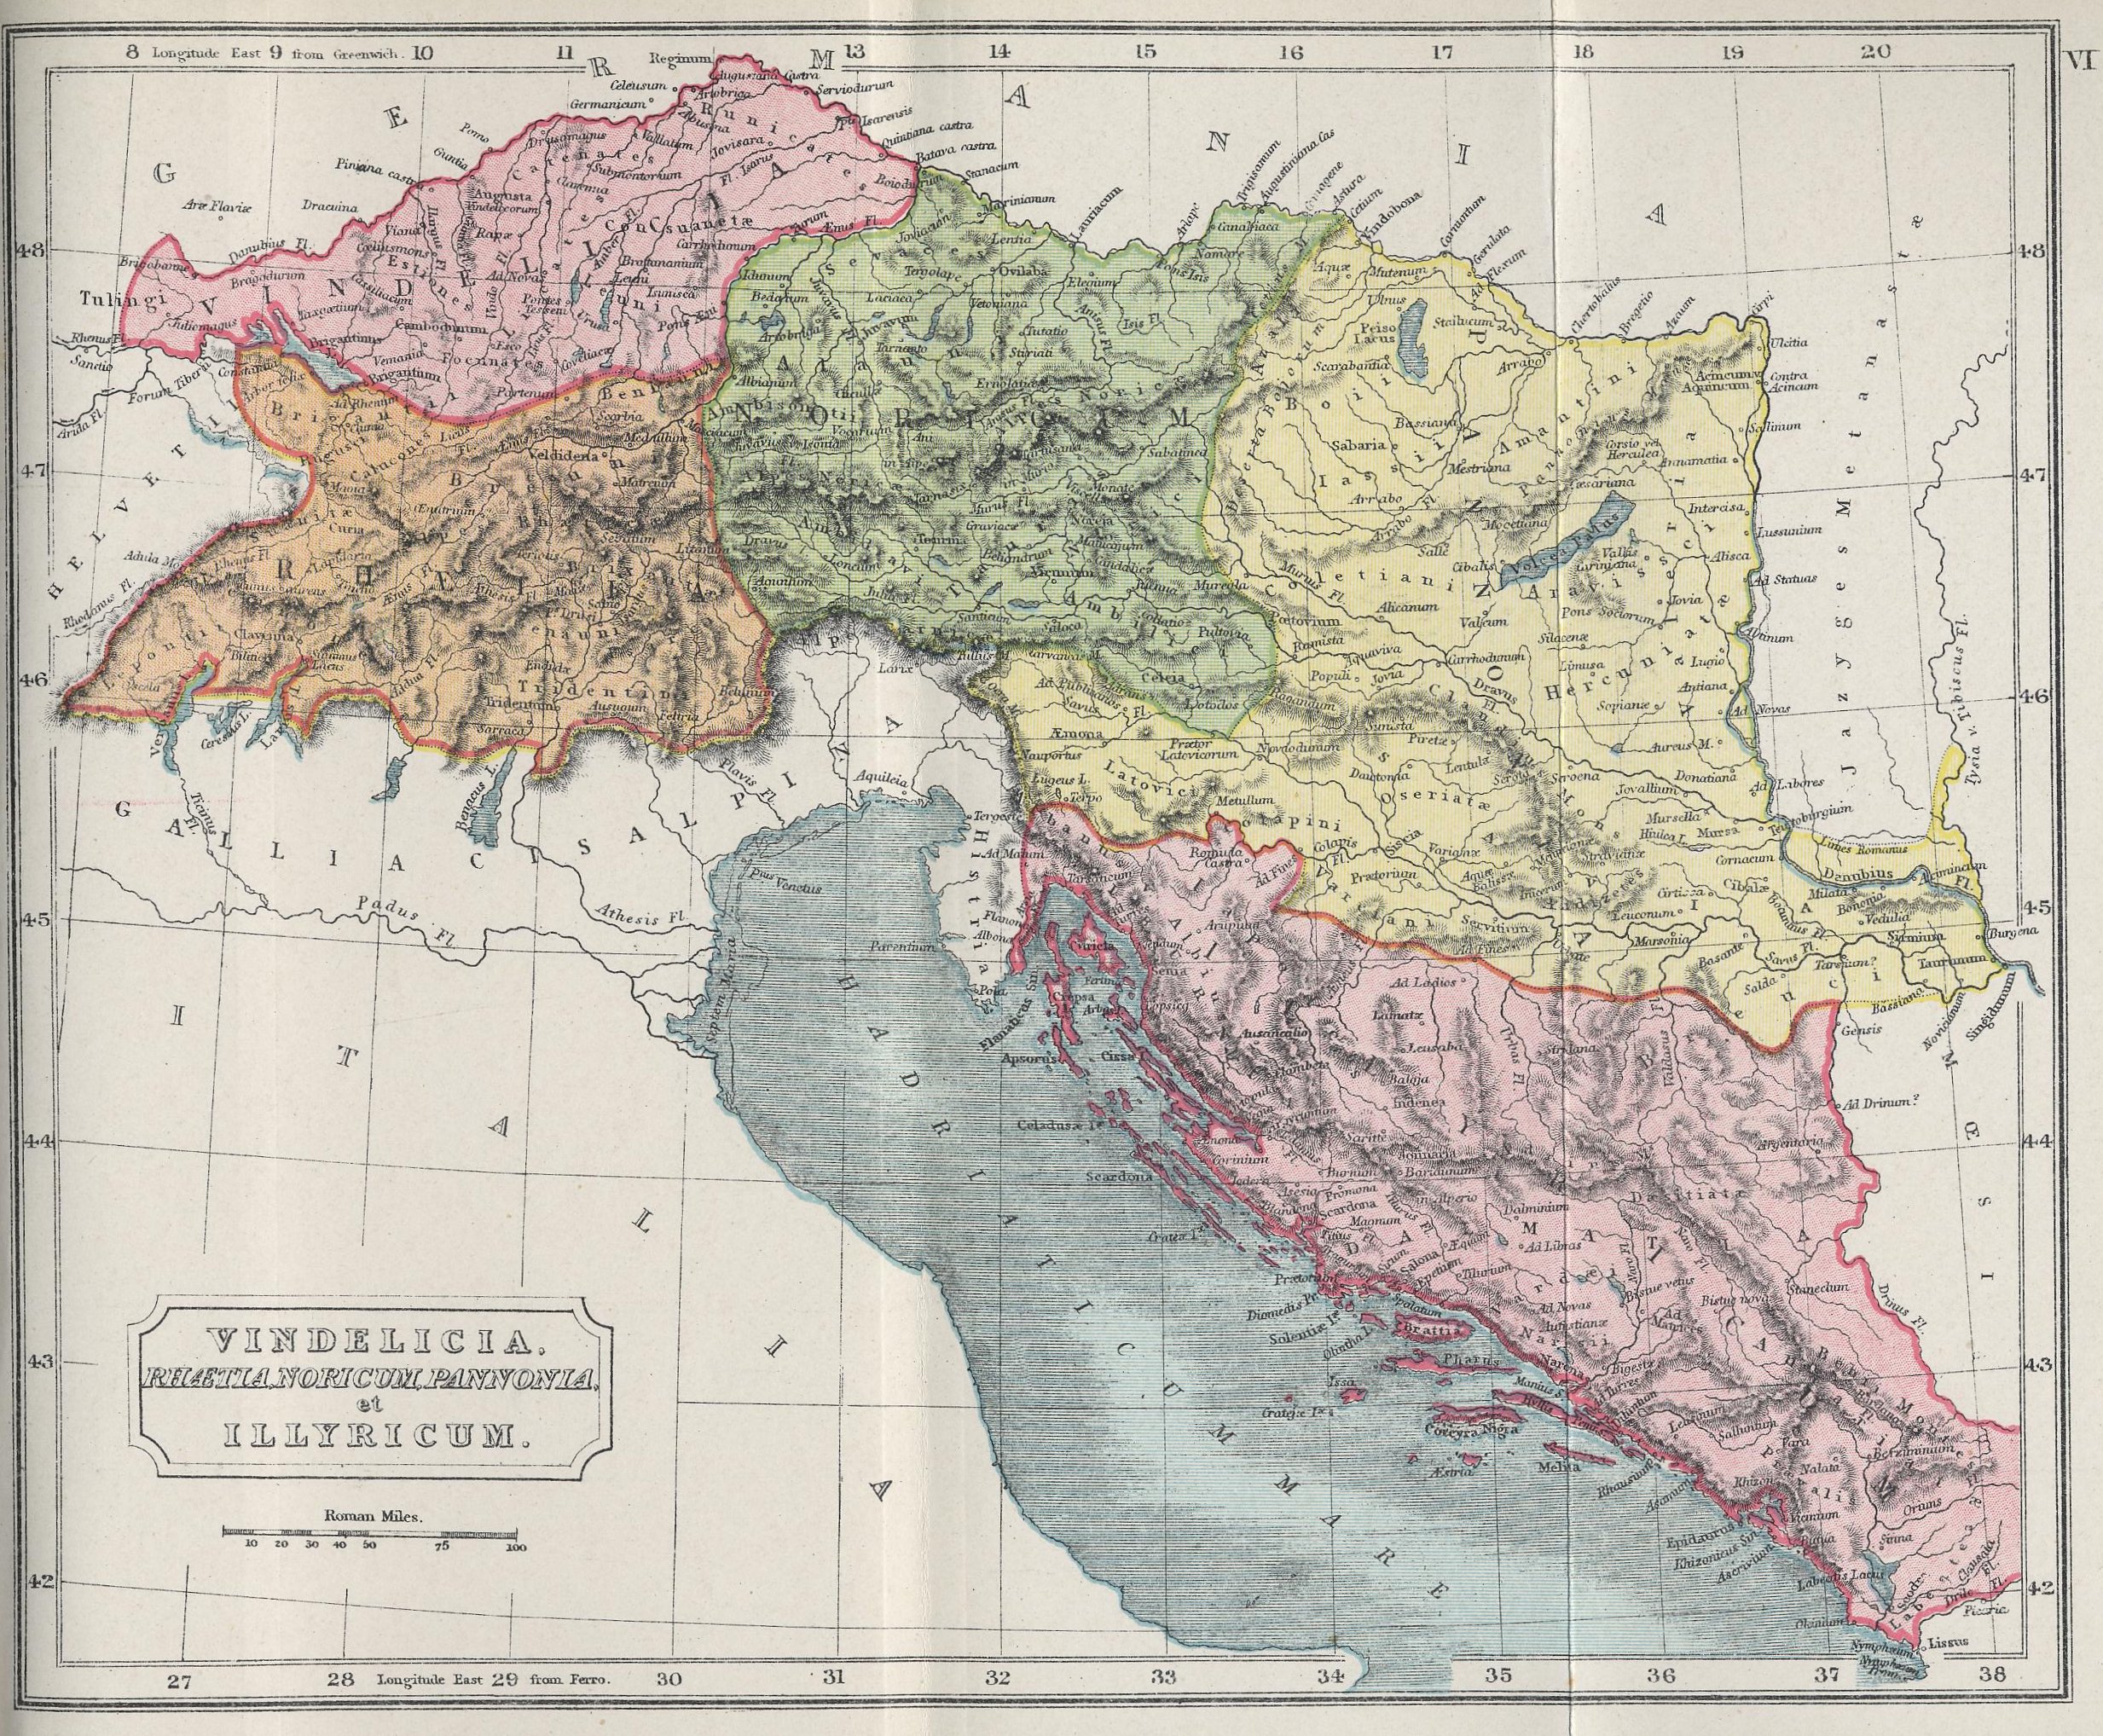 Map of Alpine Region and Western Balkans70 BC - AD 180